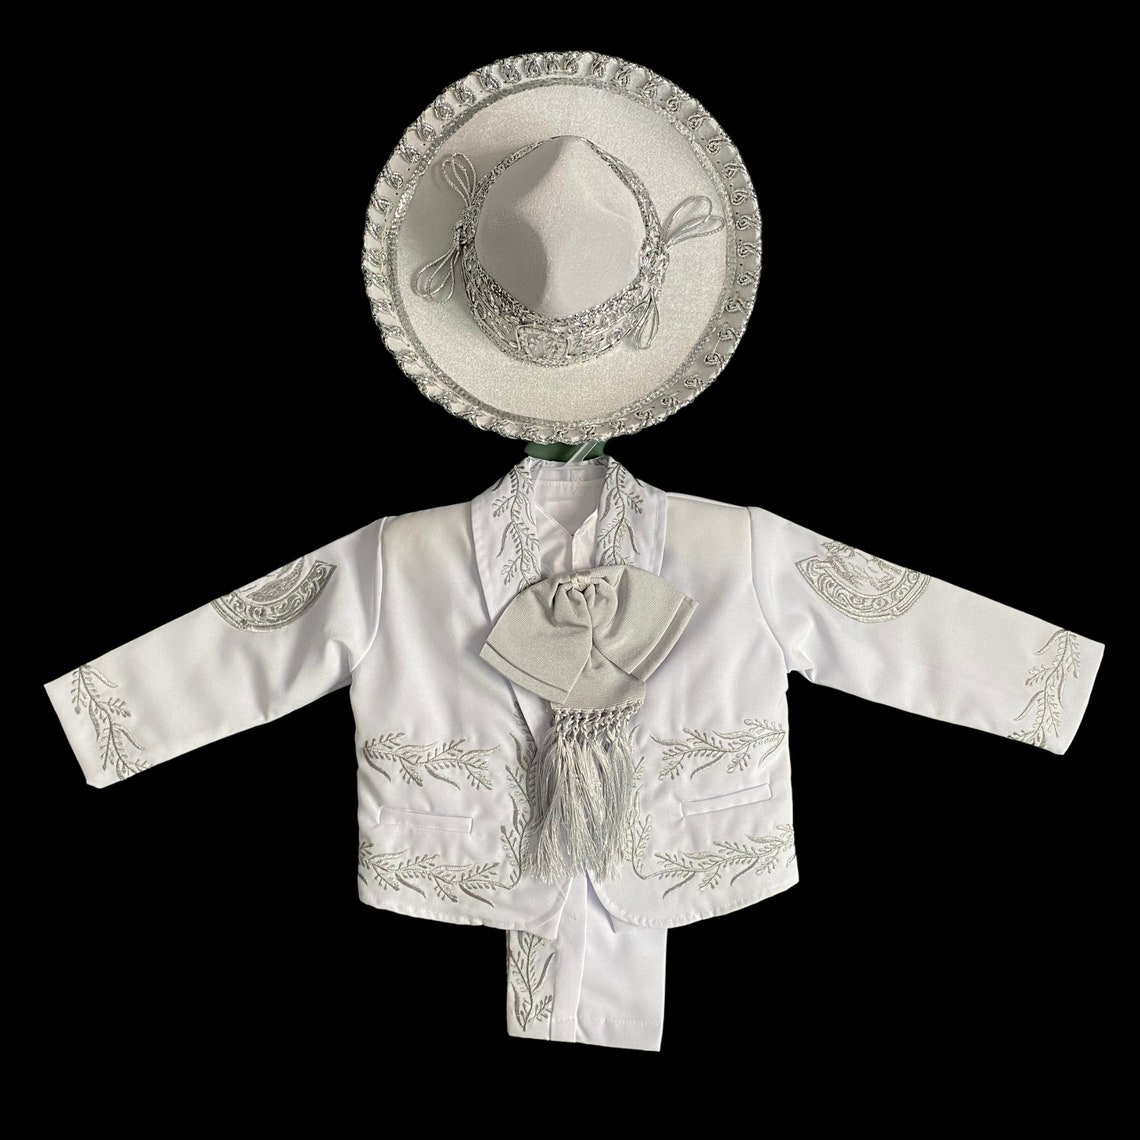 Embroidered Charro outfit baptism Traje de Charro detailed | Etsy